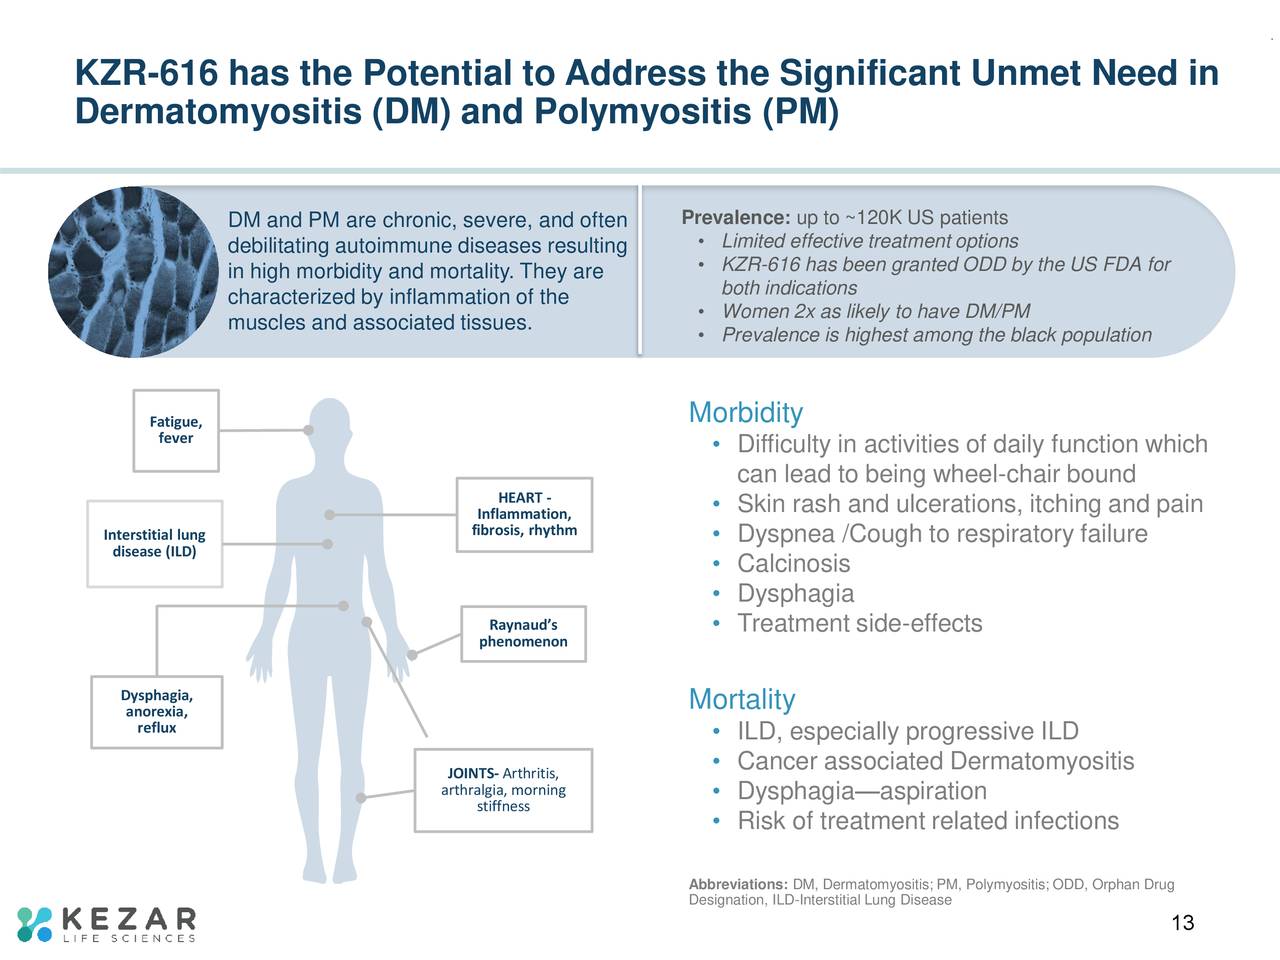 KZR-616 has the Potential to Address the Significant Unmet Need in